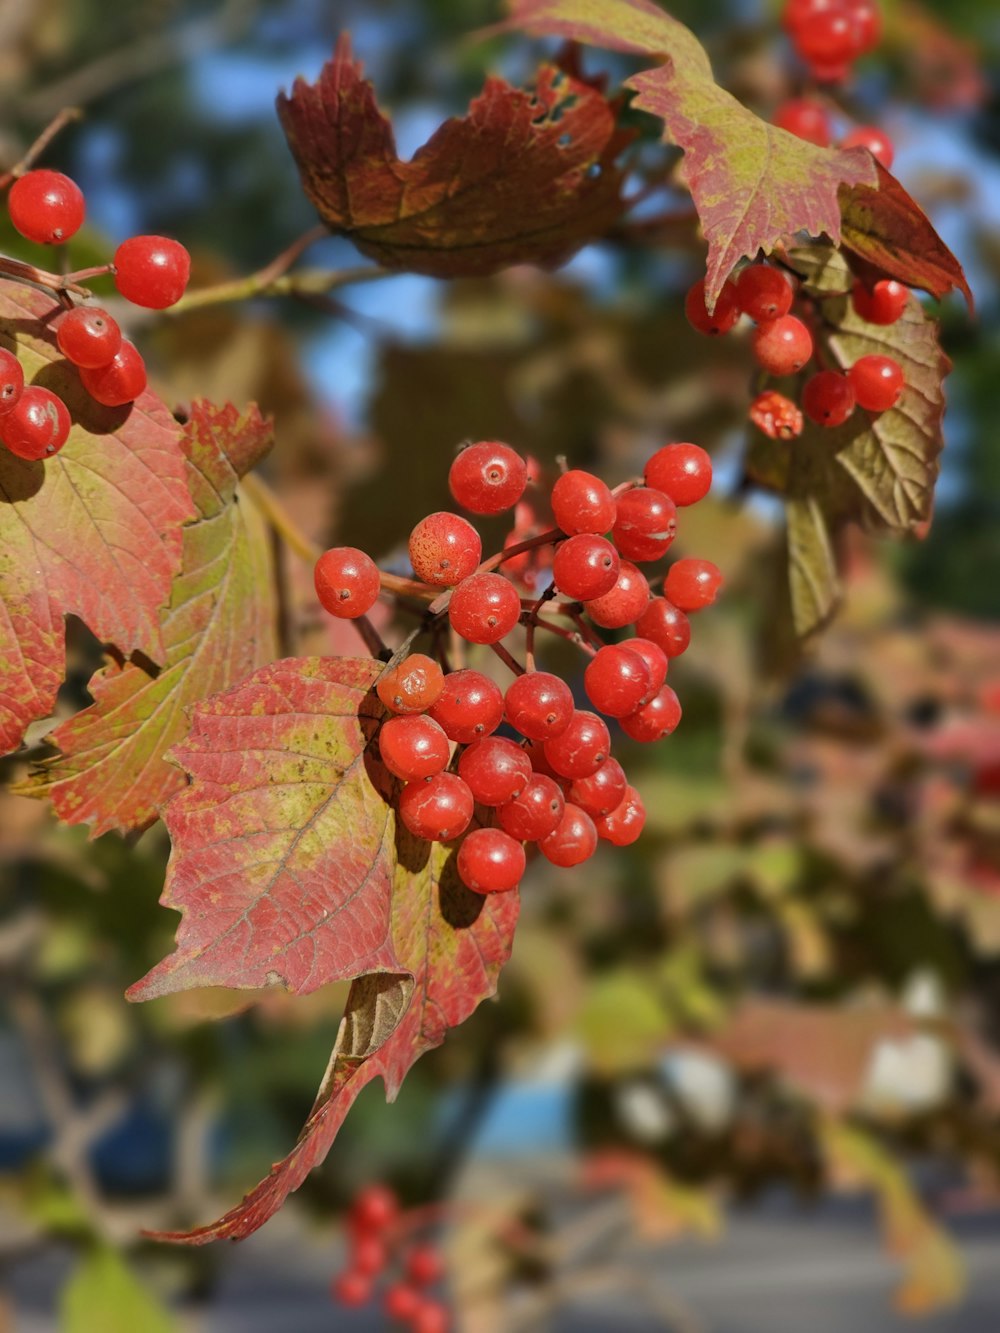 a branch with red berries and leaves on it